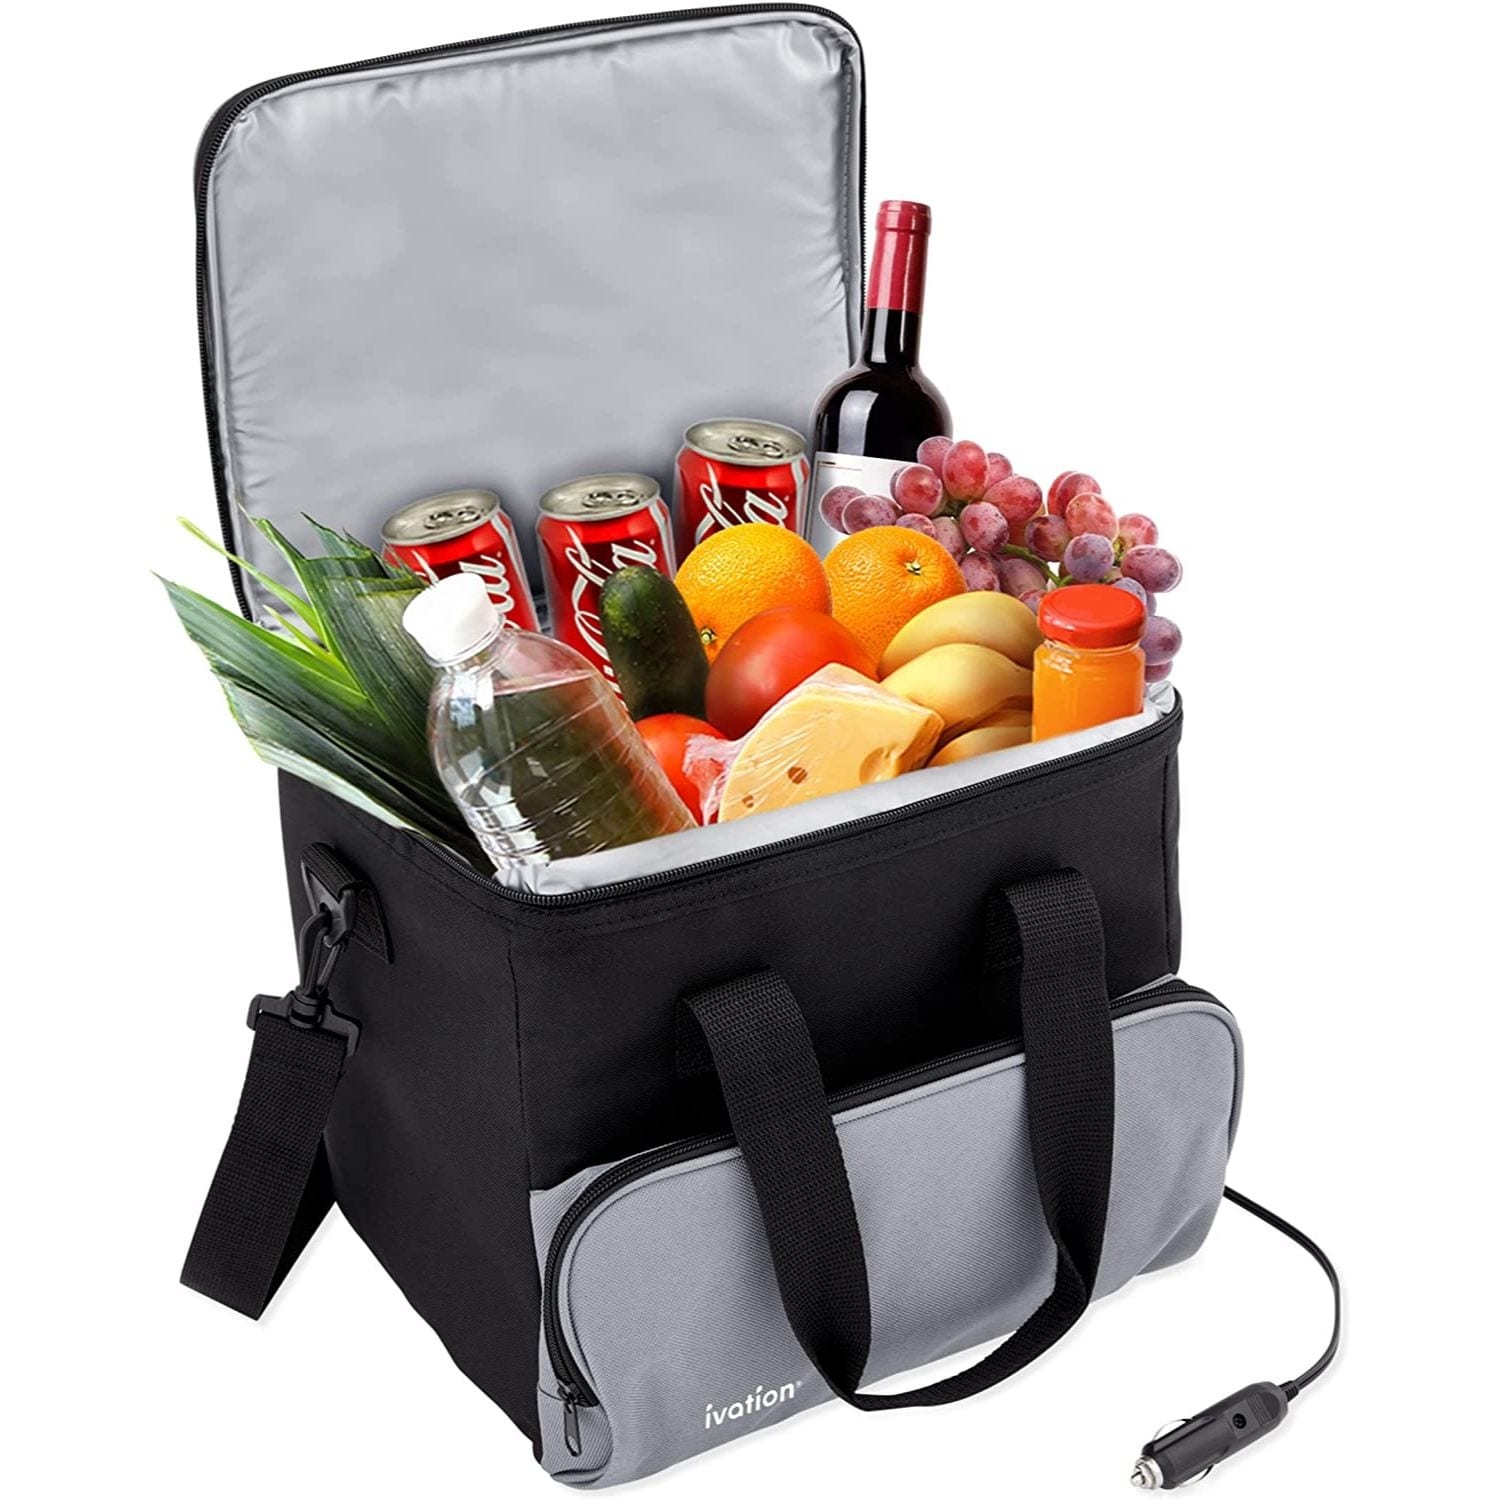 https://ak1.ostkcdn.com/images/products/is/images/direct/18d1e1801bc428f3b69b11db380b1e99589b4620/Ivation-Portable-Electric-Cooler-Bag%2C-15L-Thermoelectric-Portable-Cooler.jpg